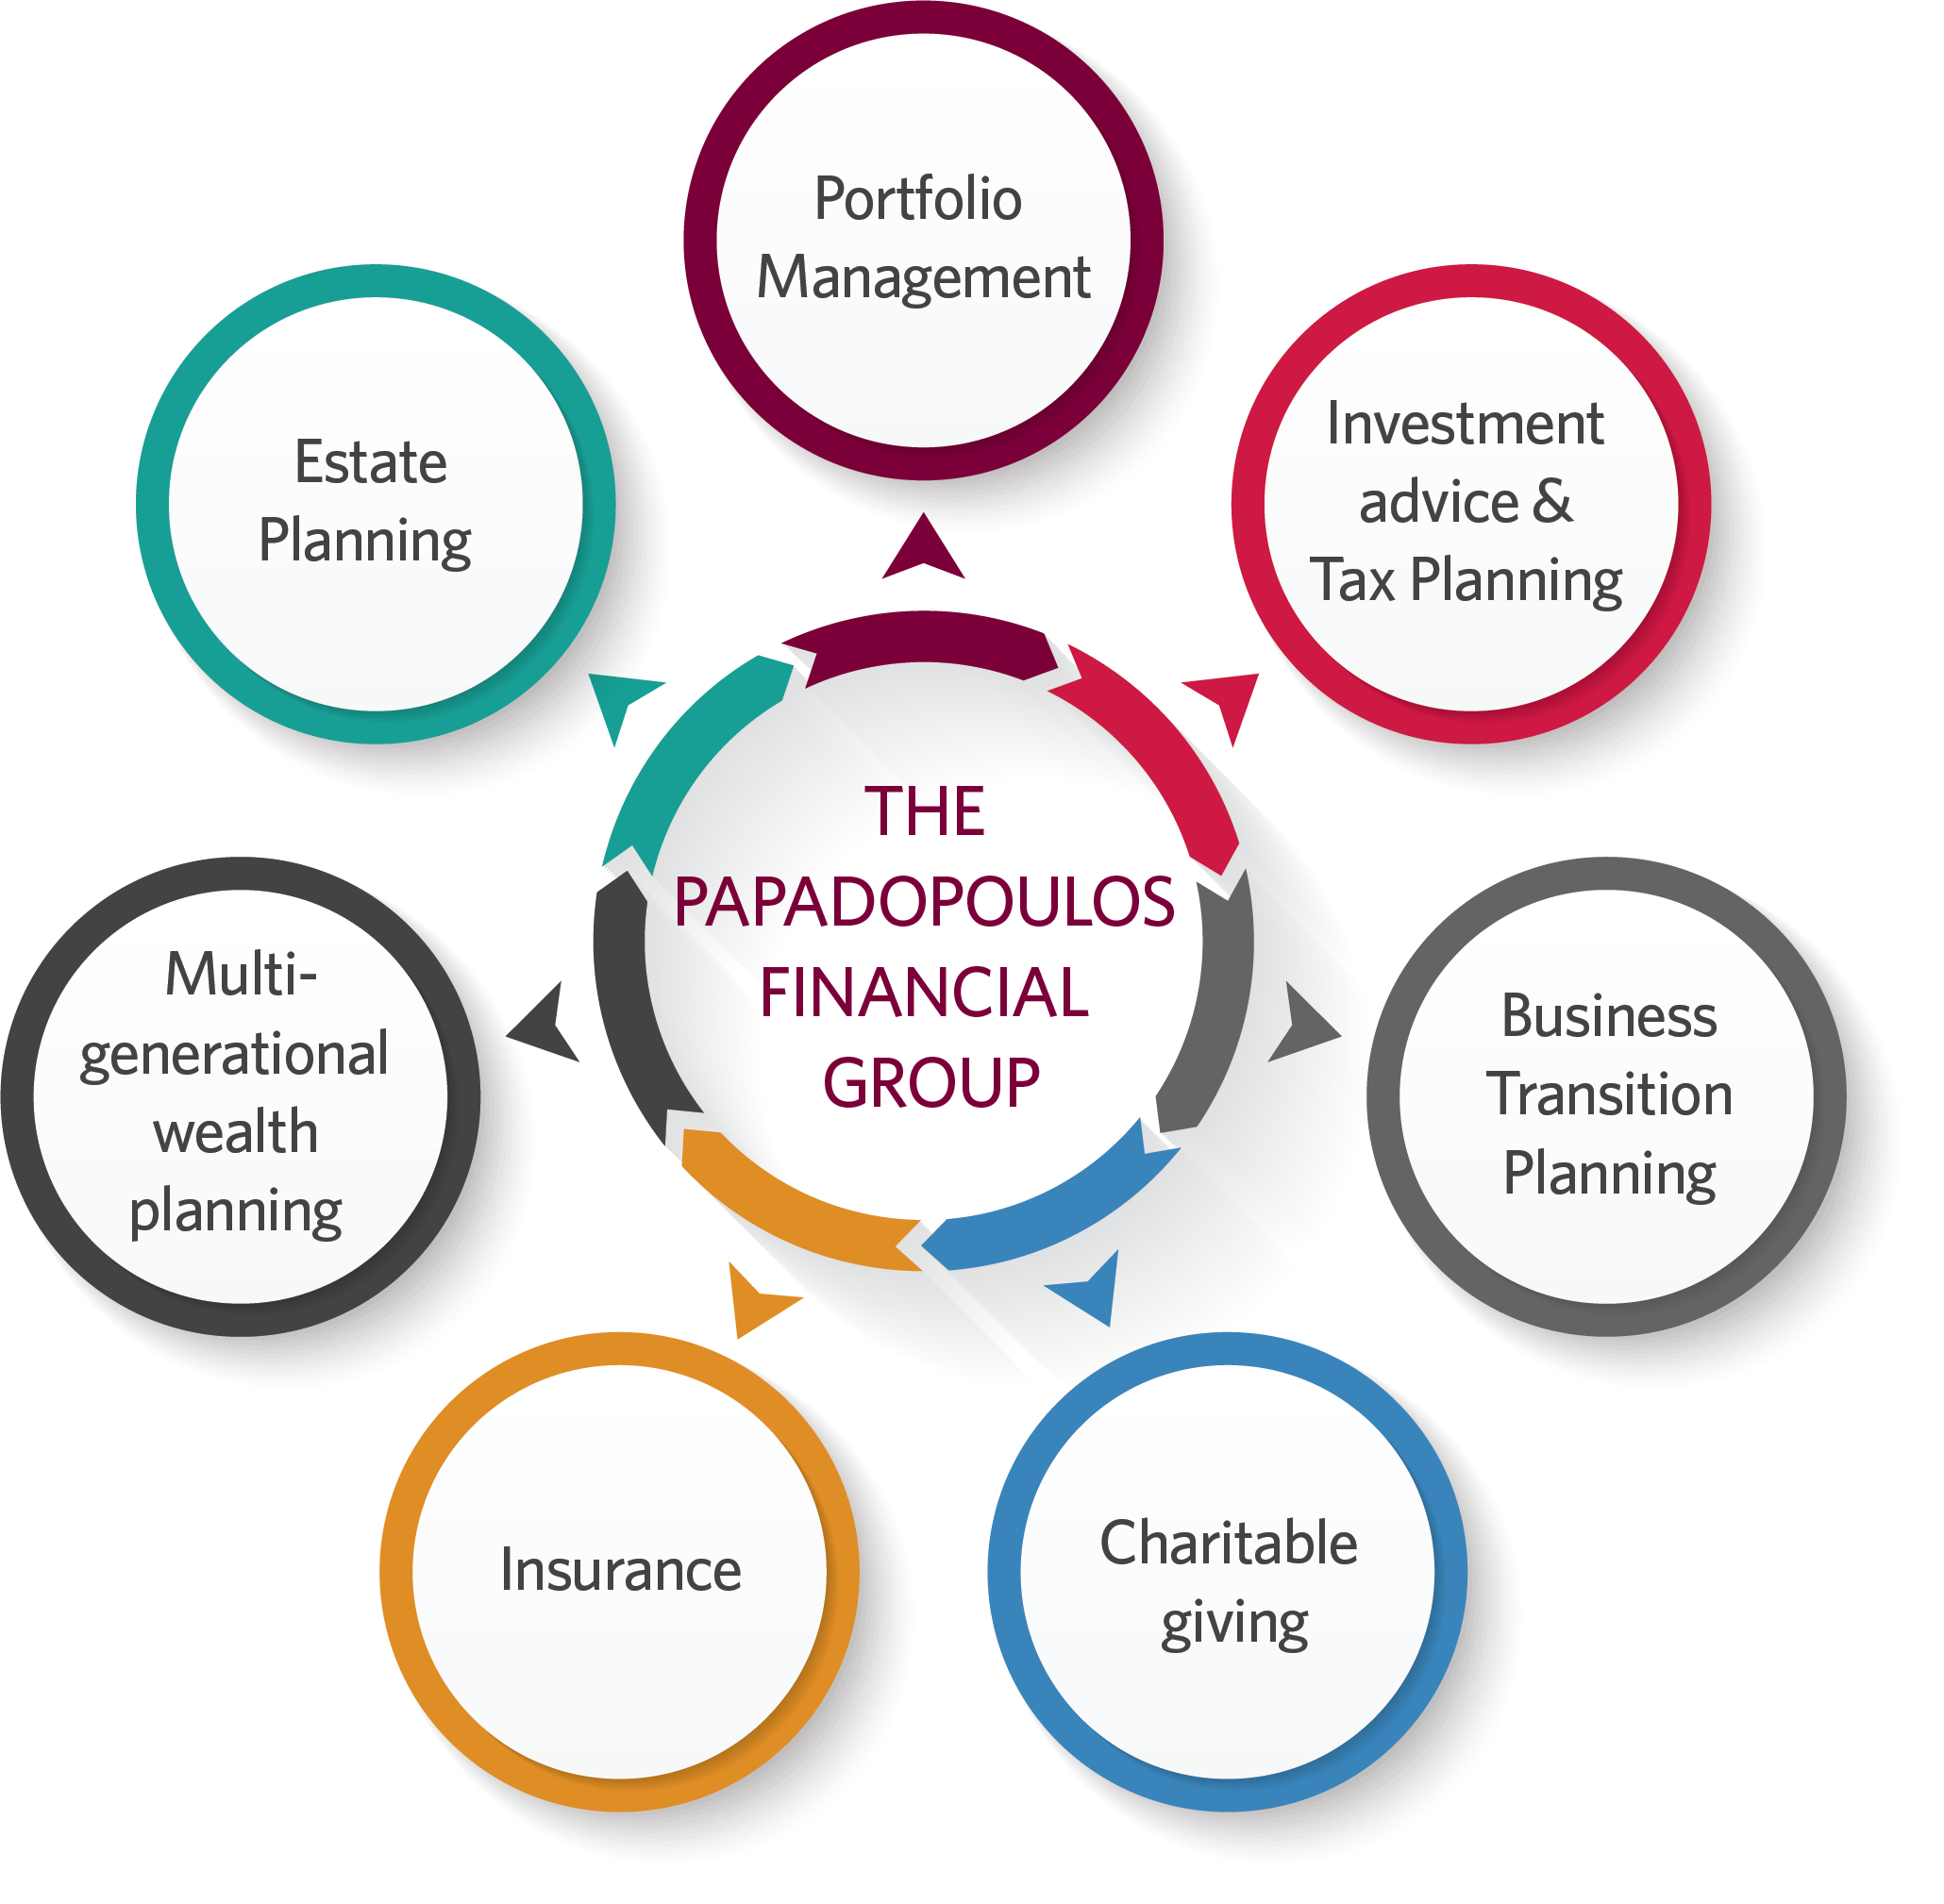 The services of the Papadopoulos Financial Group